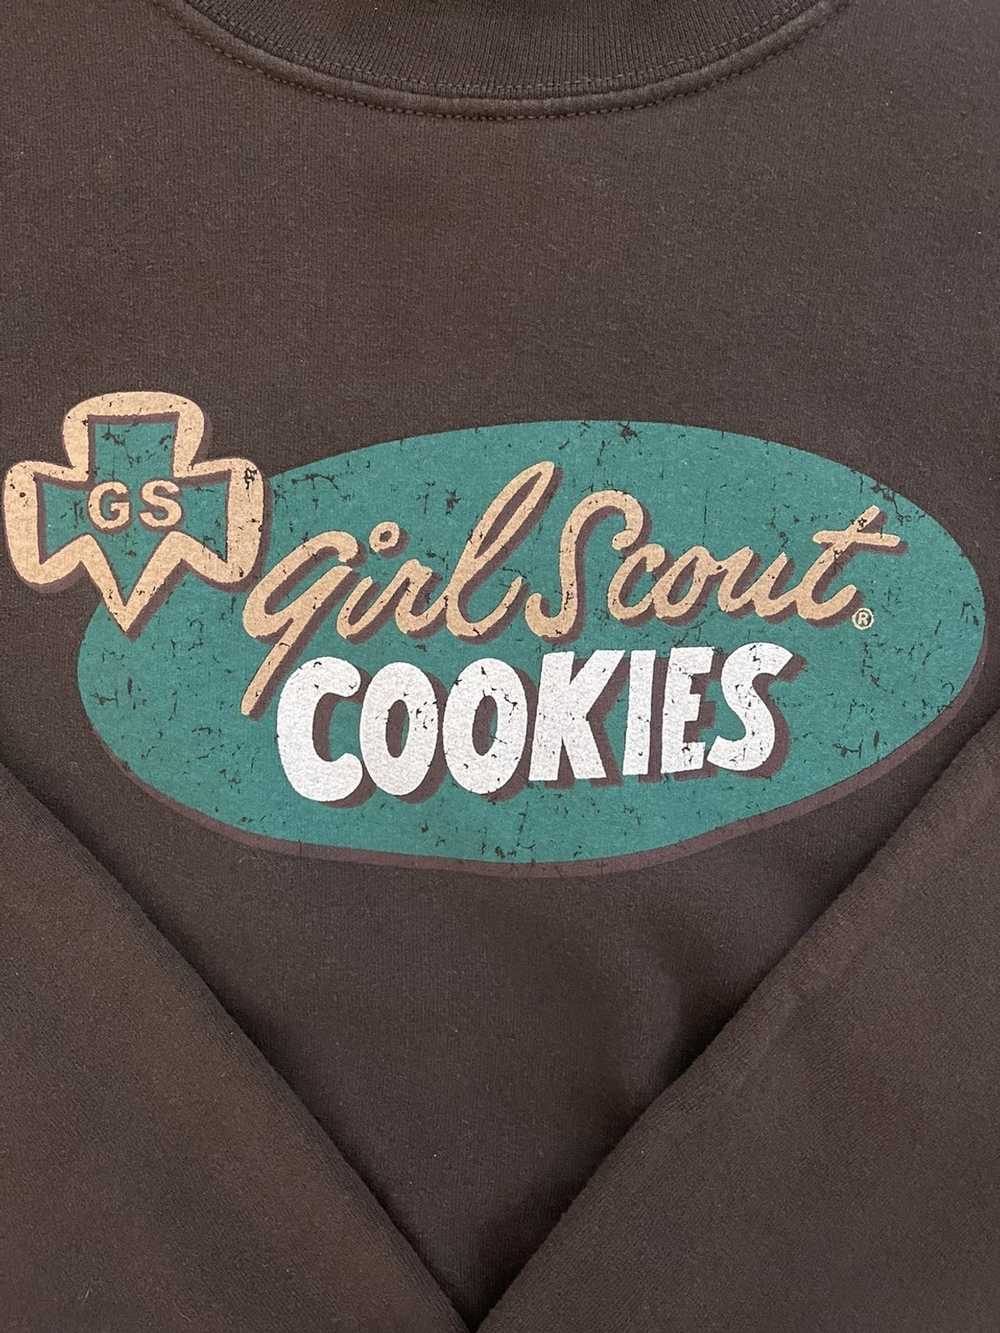 Vintage GIRL SCOUT COOKIES SWEATER - image 2